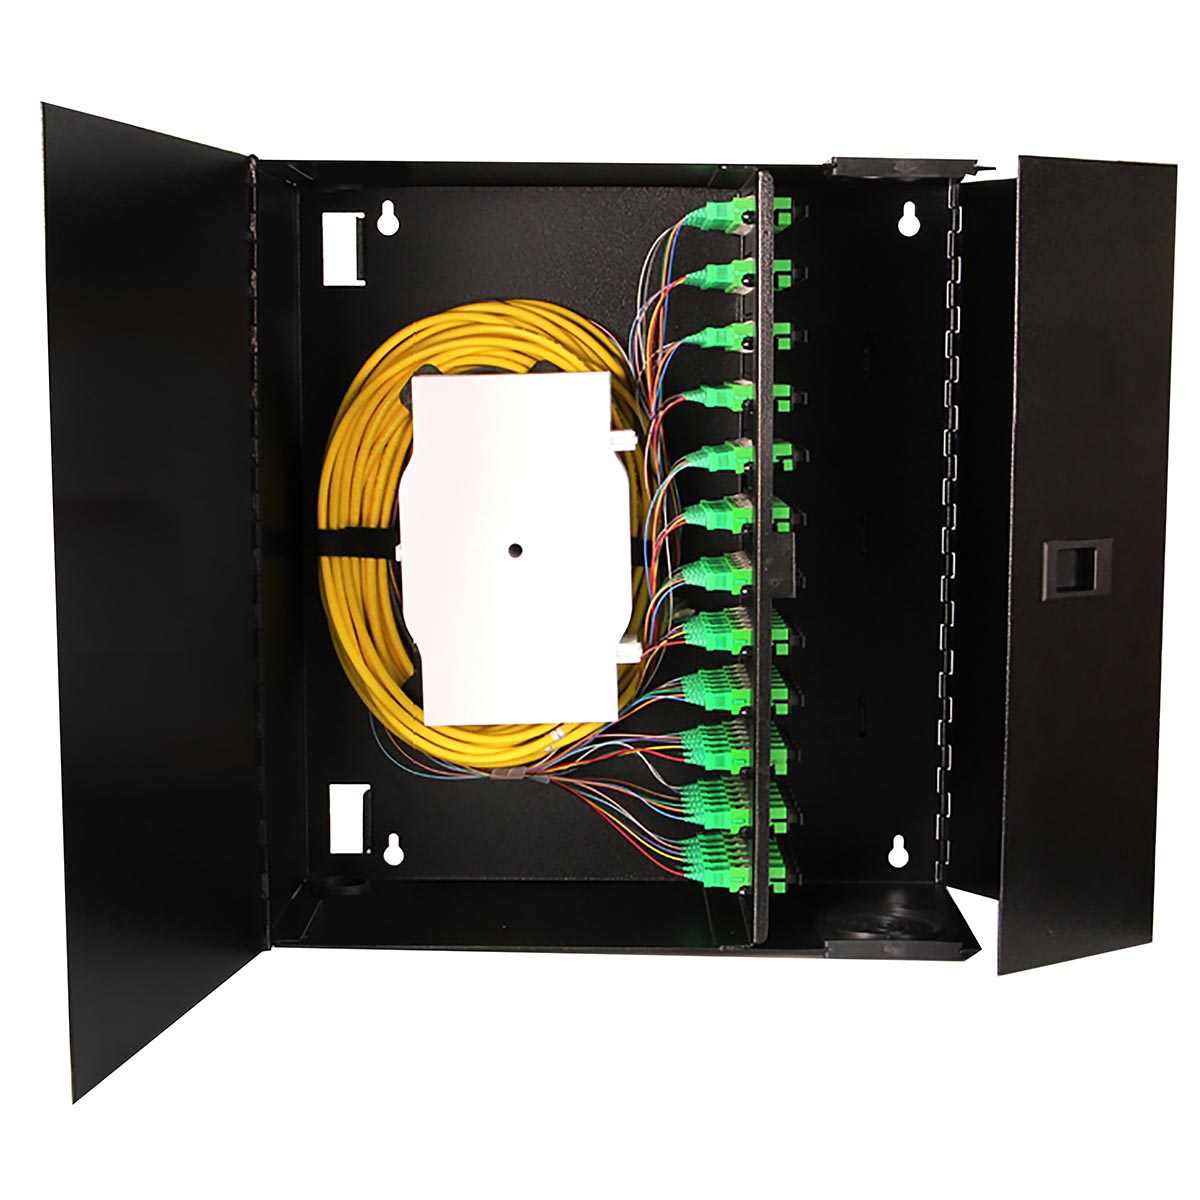 CLEERLINE Wall Mount Enclosure Holds Up to 4 Plates